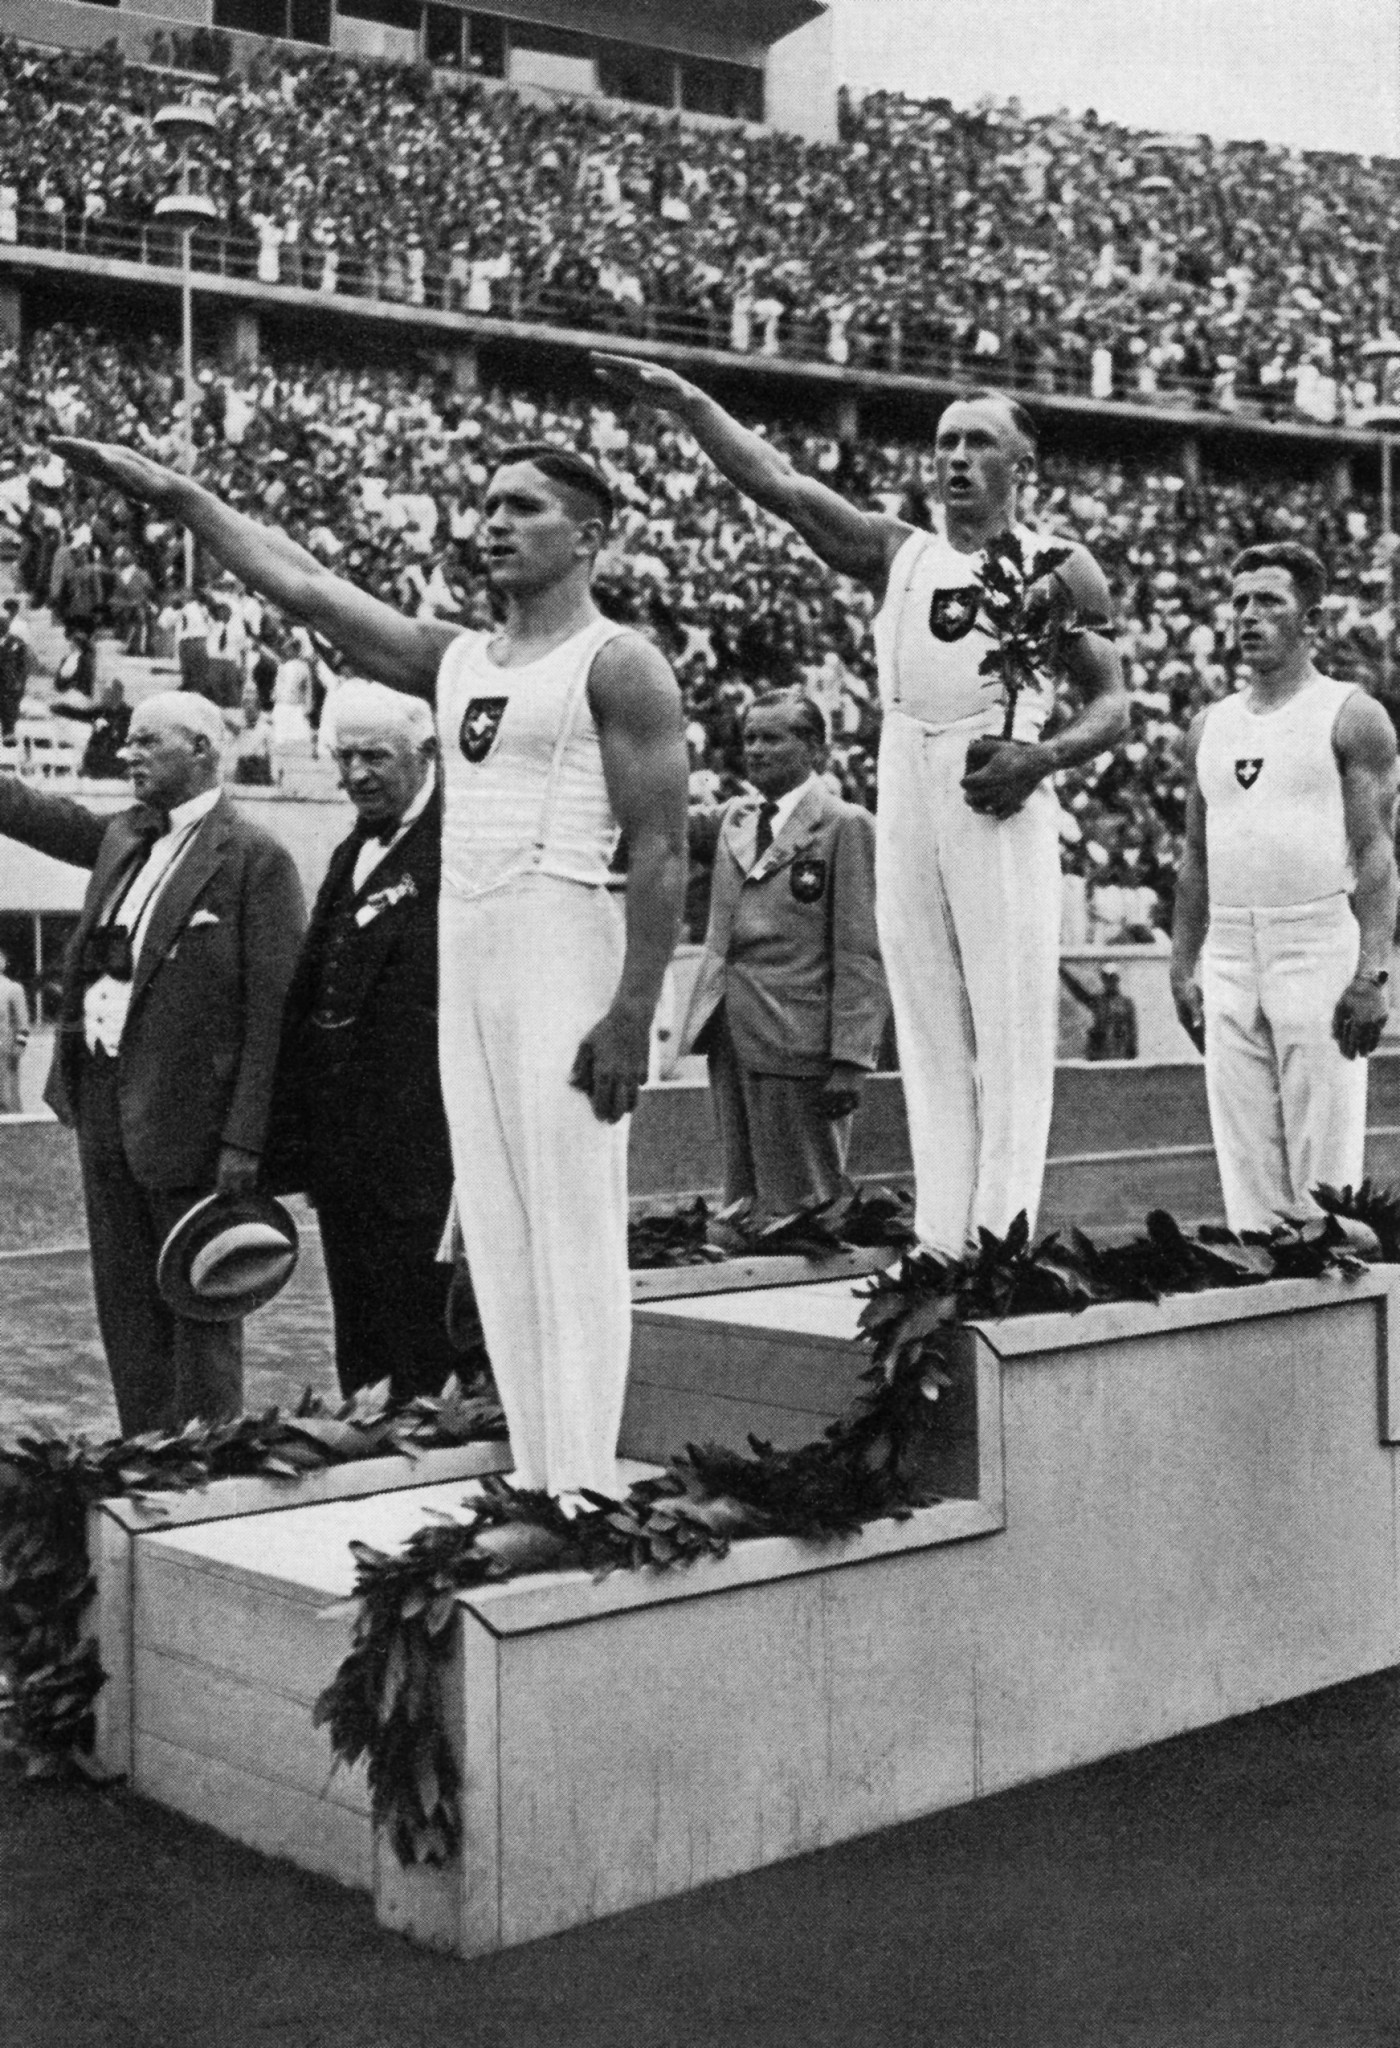 Many German athletes gave the Nazi salute on the victory podium at the 1936 Games in Berlin ©Getty Images